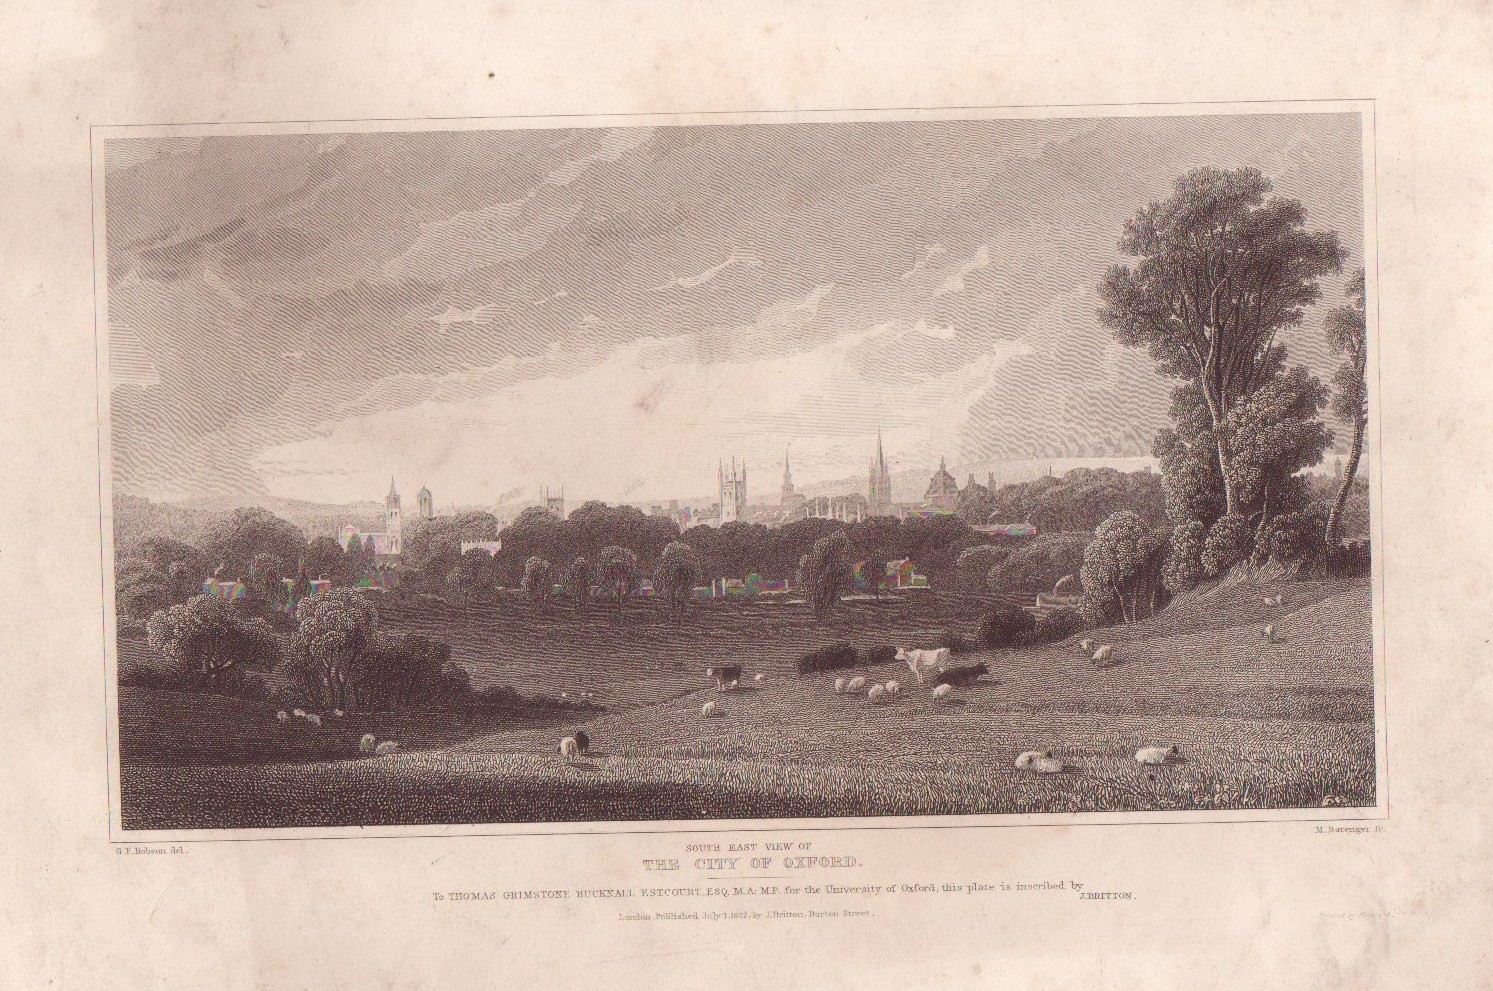 Print - South East View of the City of Oxford. - Barenger